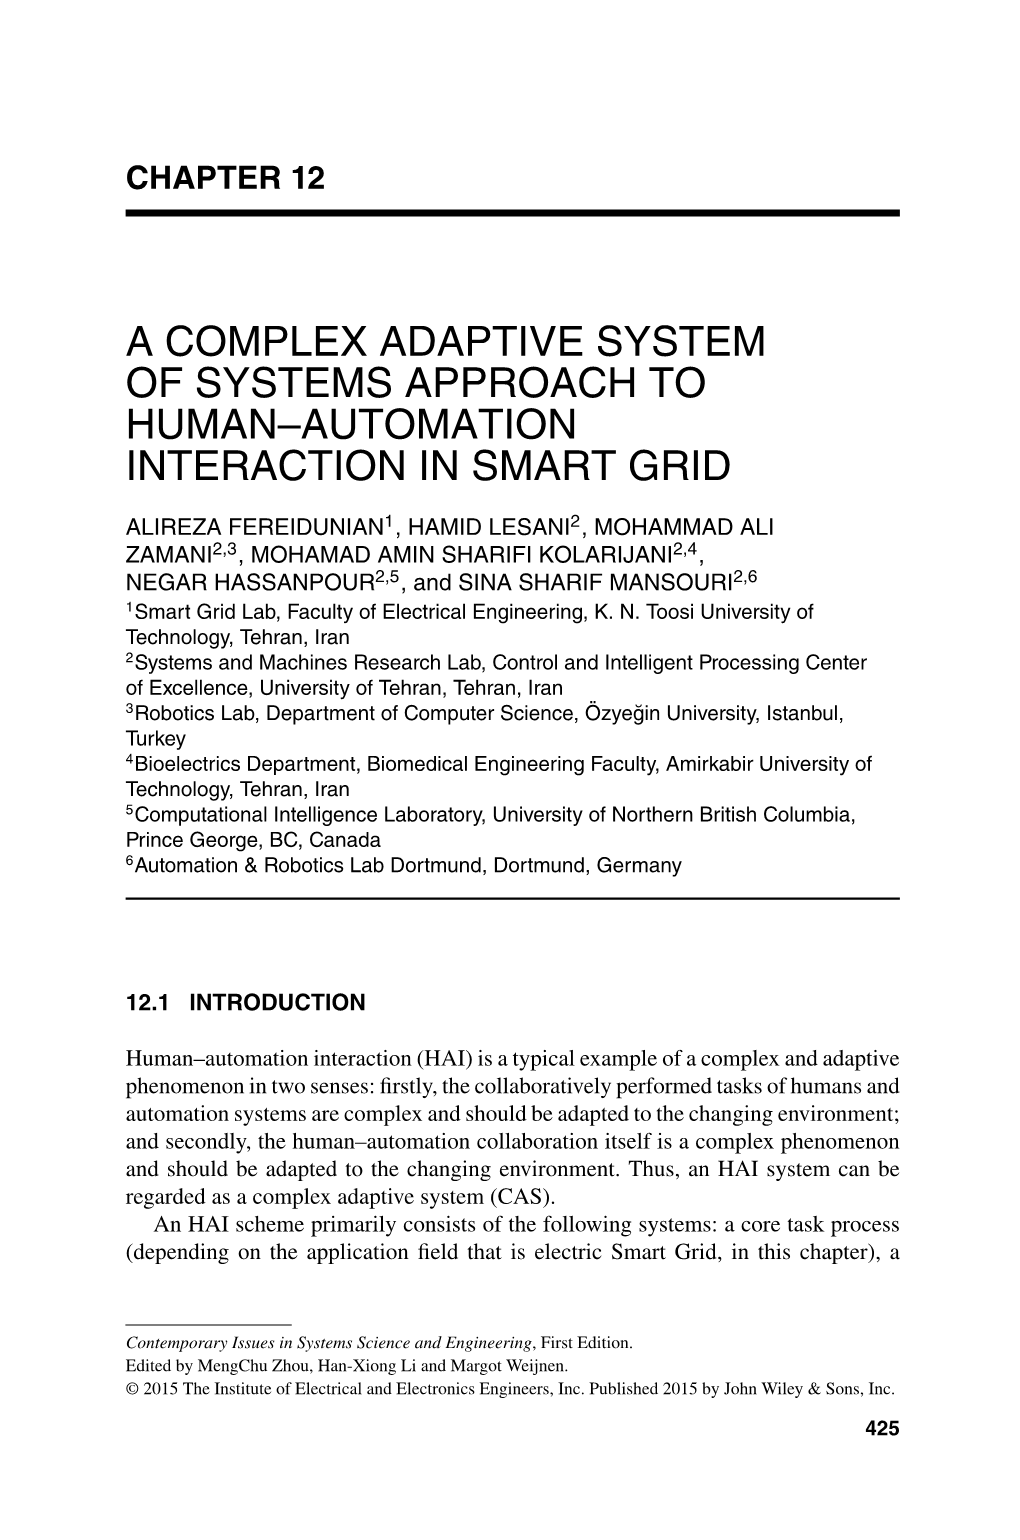 A Complex Adaptive System of Systems Approach to Human–Automation Interaction in Smart Grid